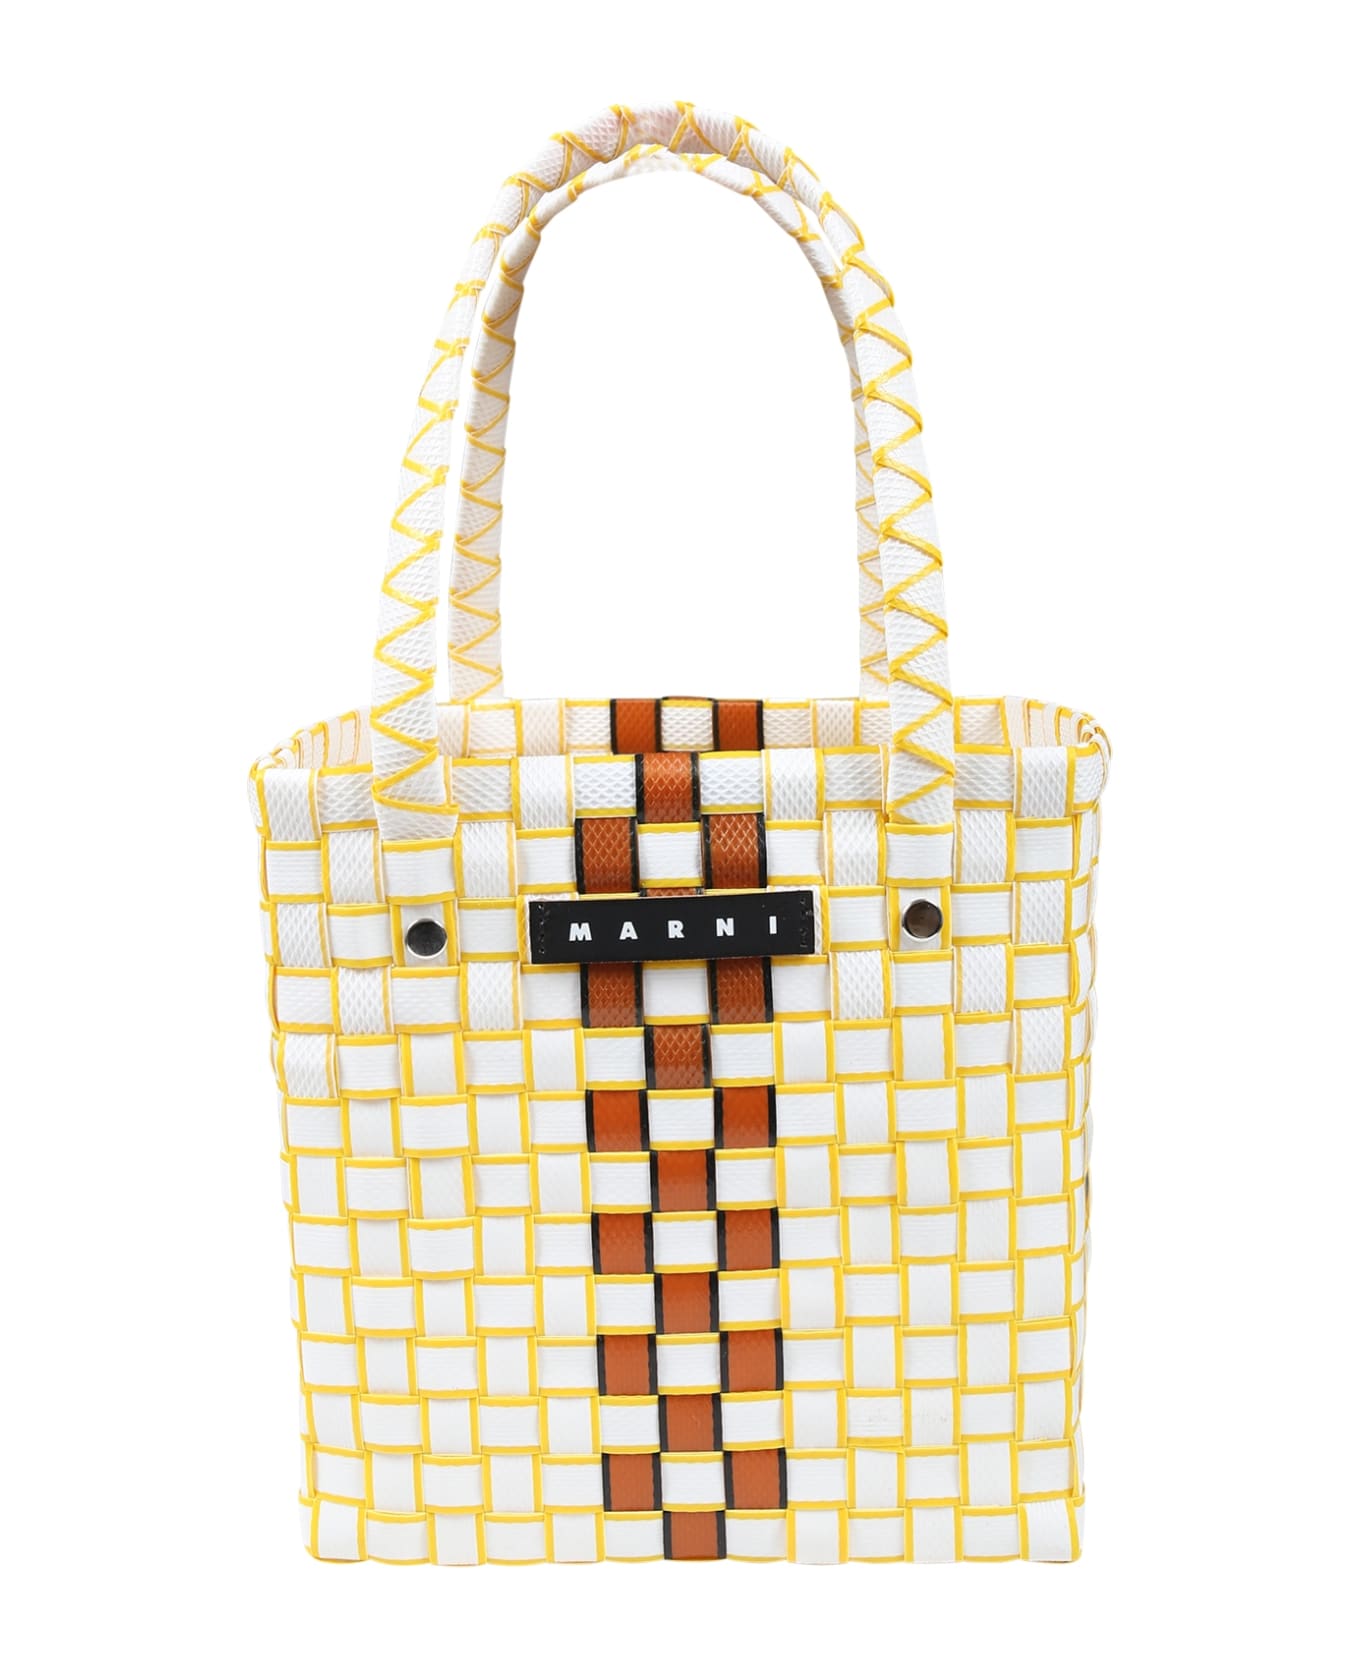 Marni White Bag For Girl With Logo - Ivory アクセサリー＆ギフト